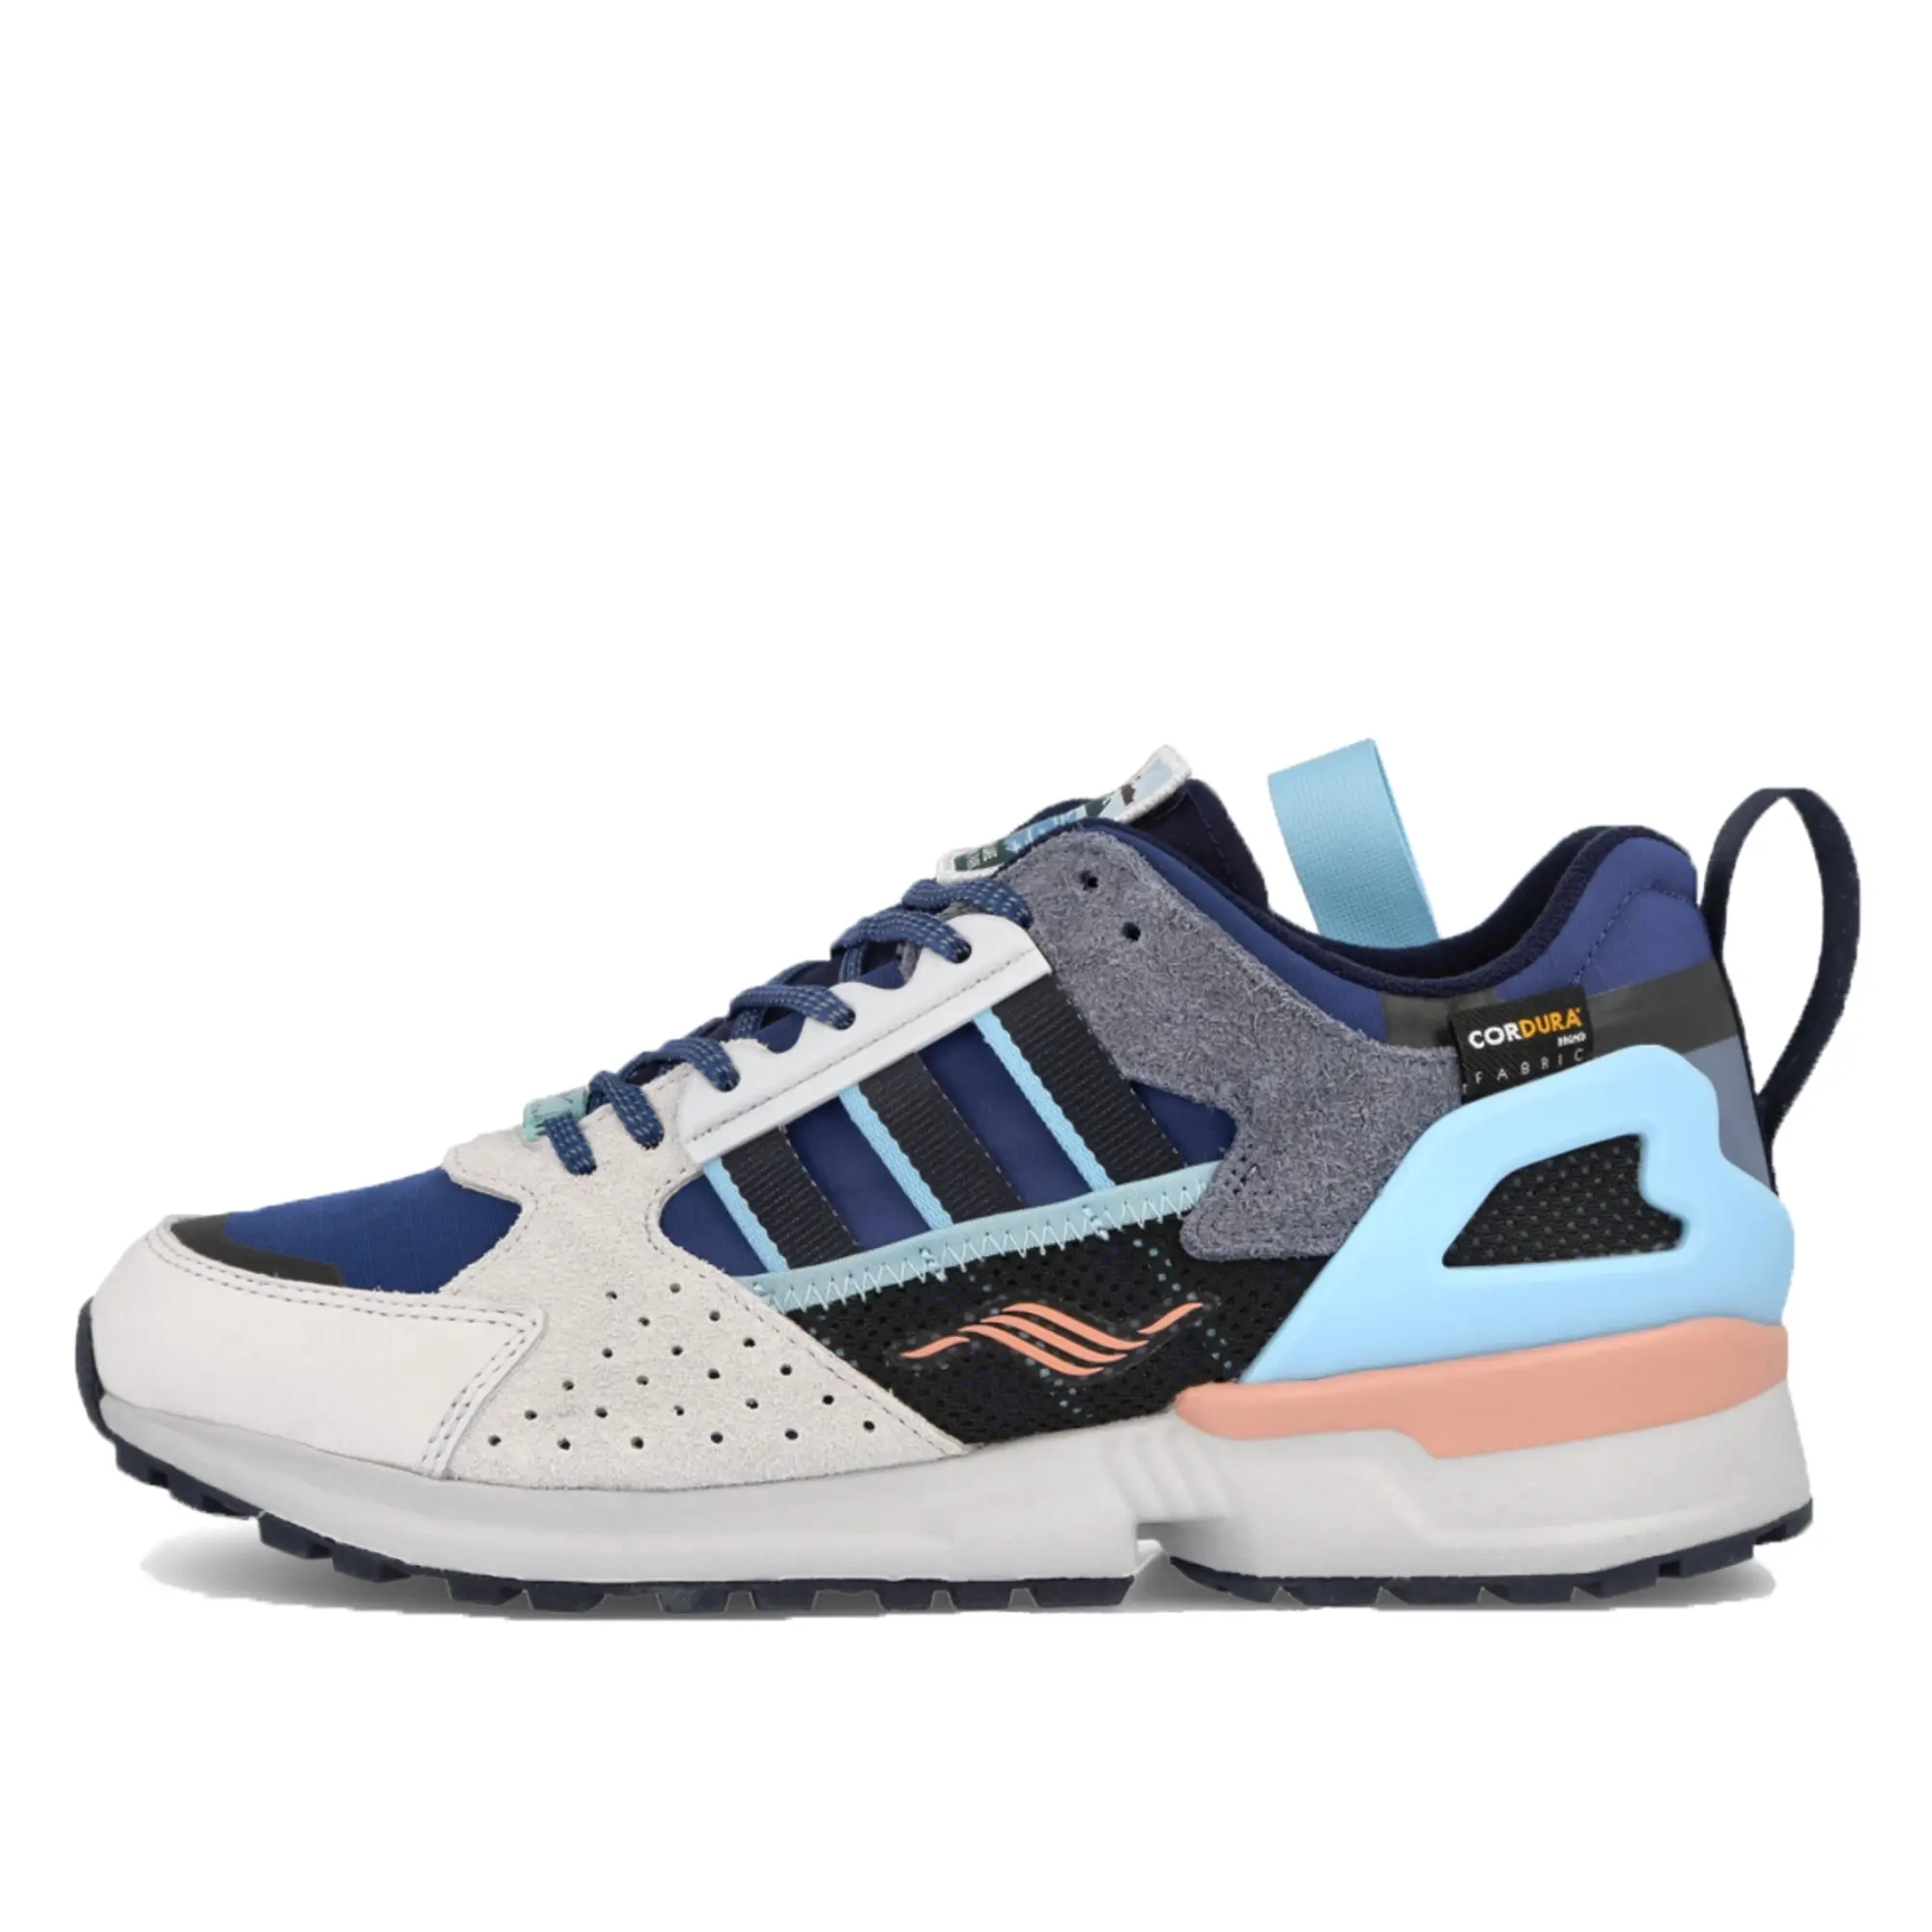 adidas x National Park Foundation ZX 10000 C Crater Lake